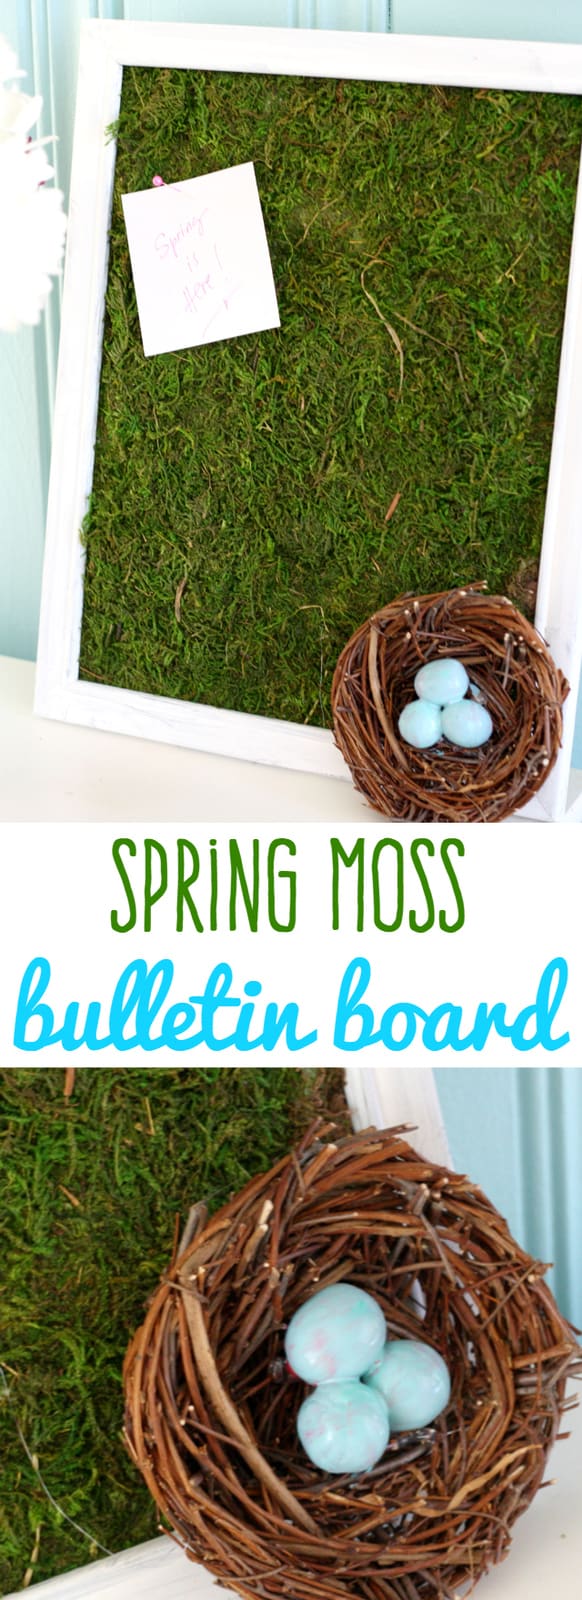 Make a very fresh and fun spring moss bulletin board! Easy and so cute for this time of year! #moss #spring